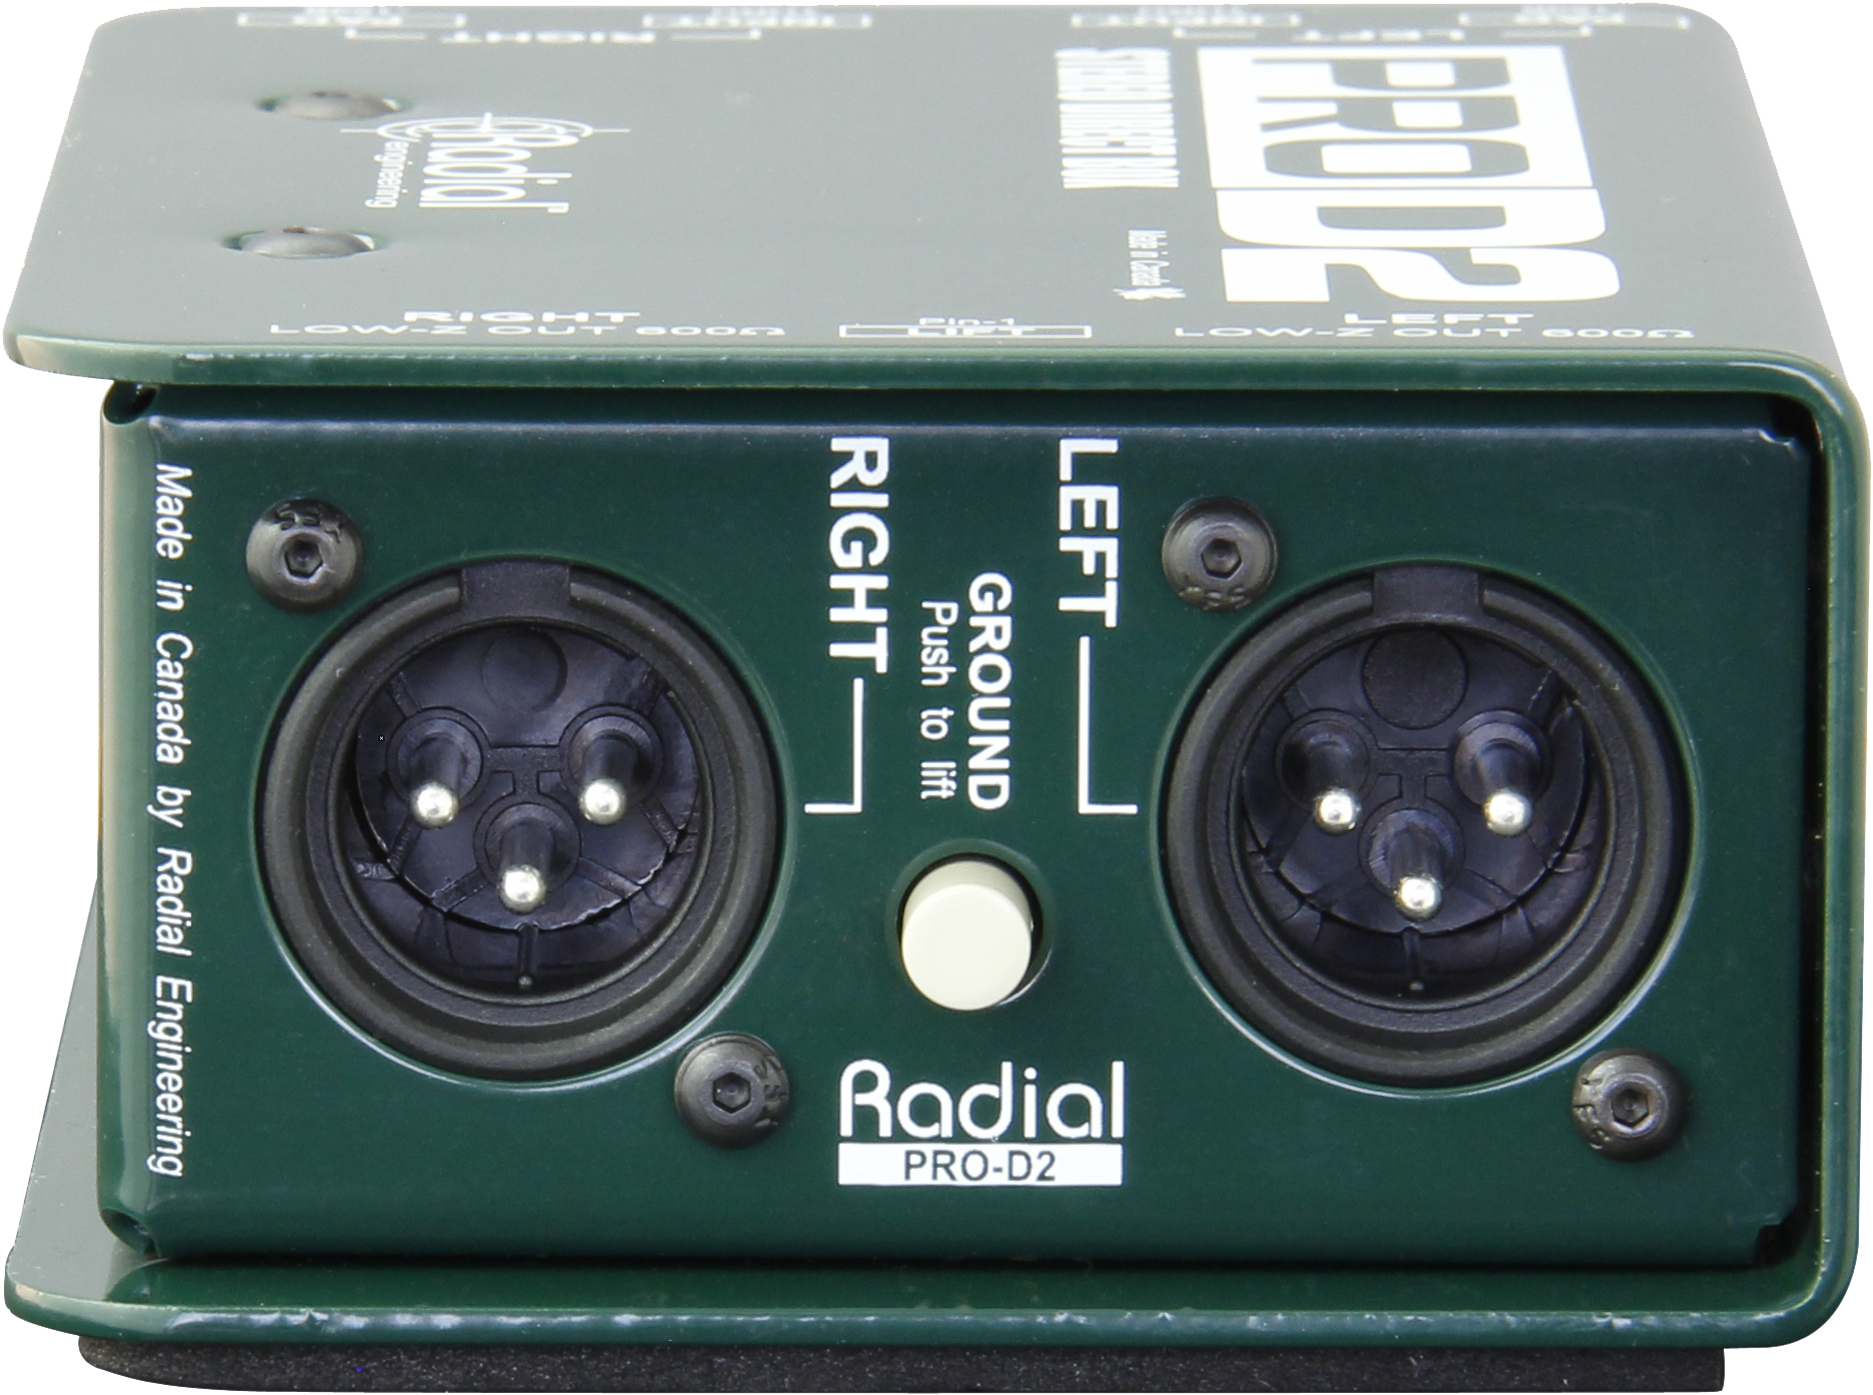 Right side of Radial PROD2.